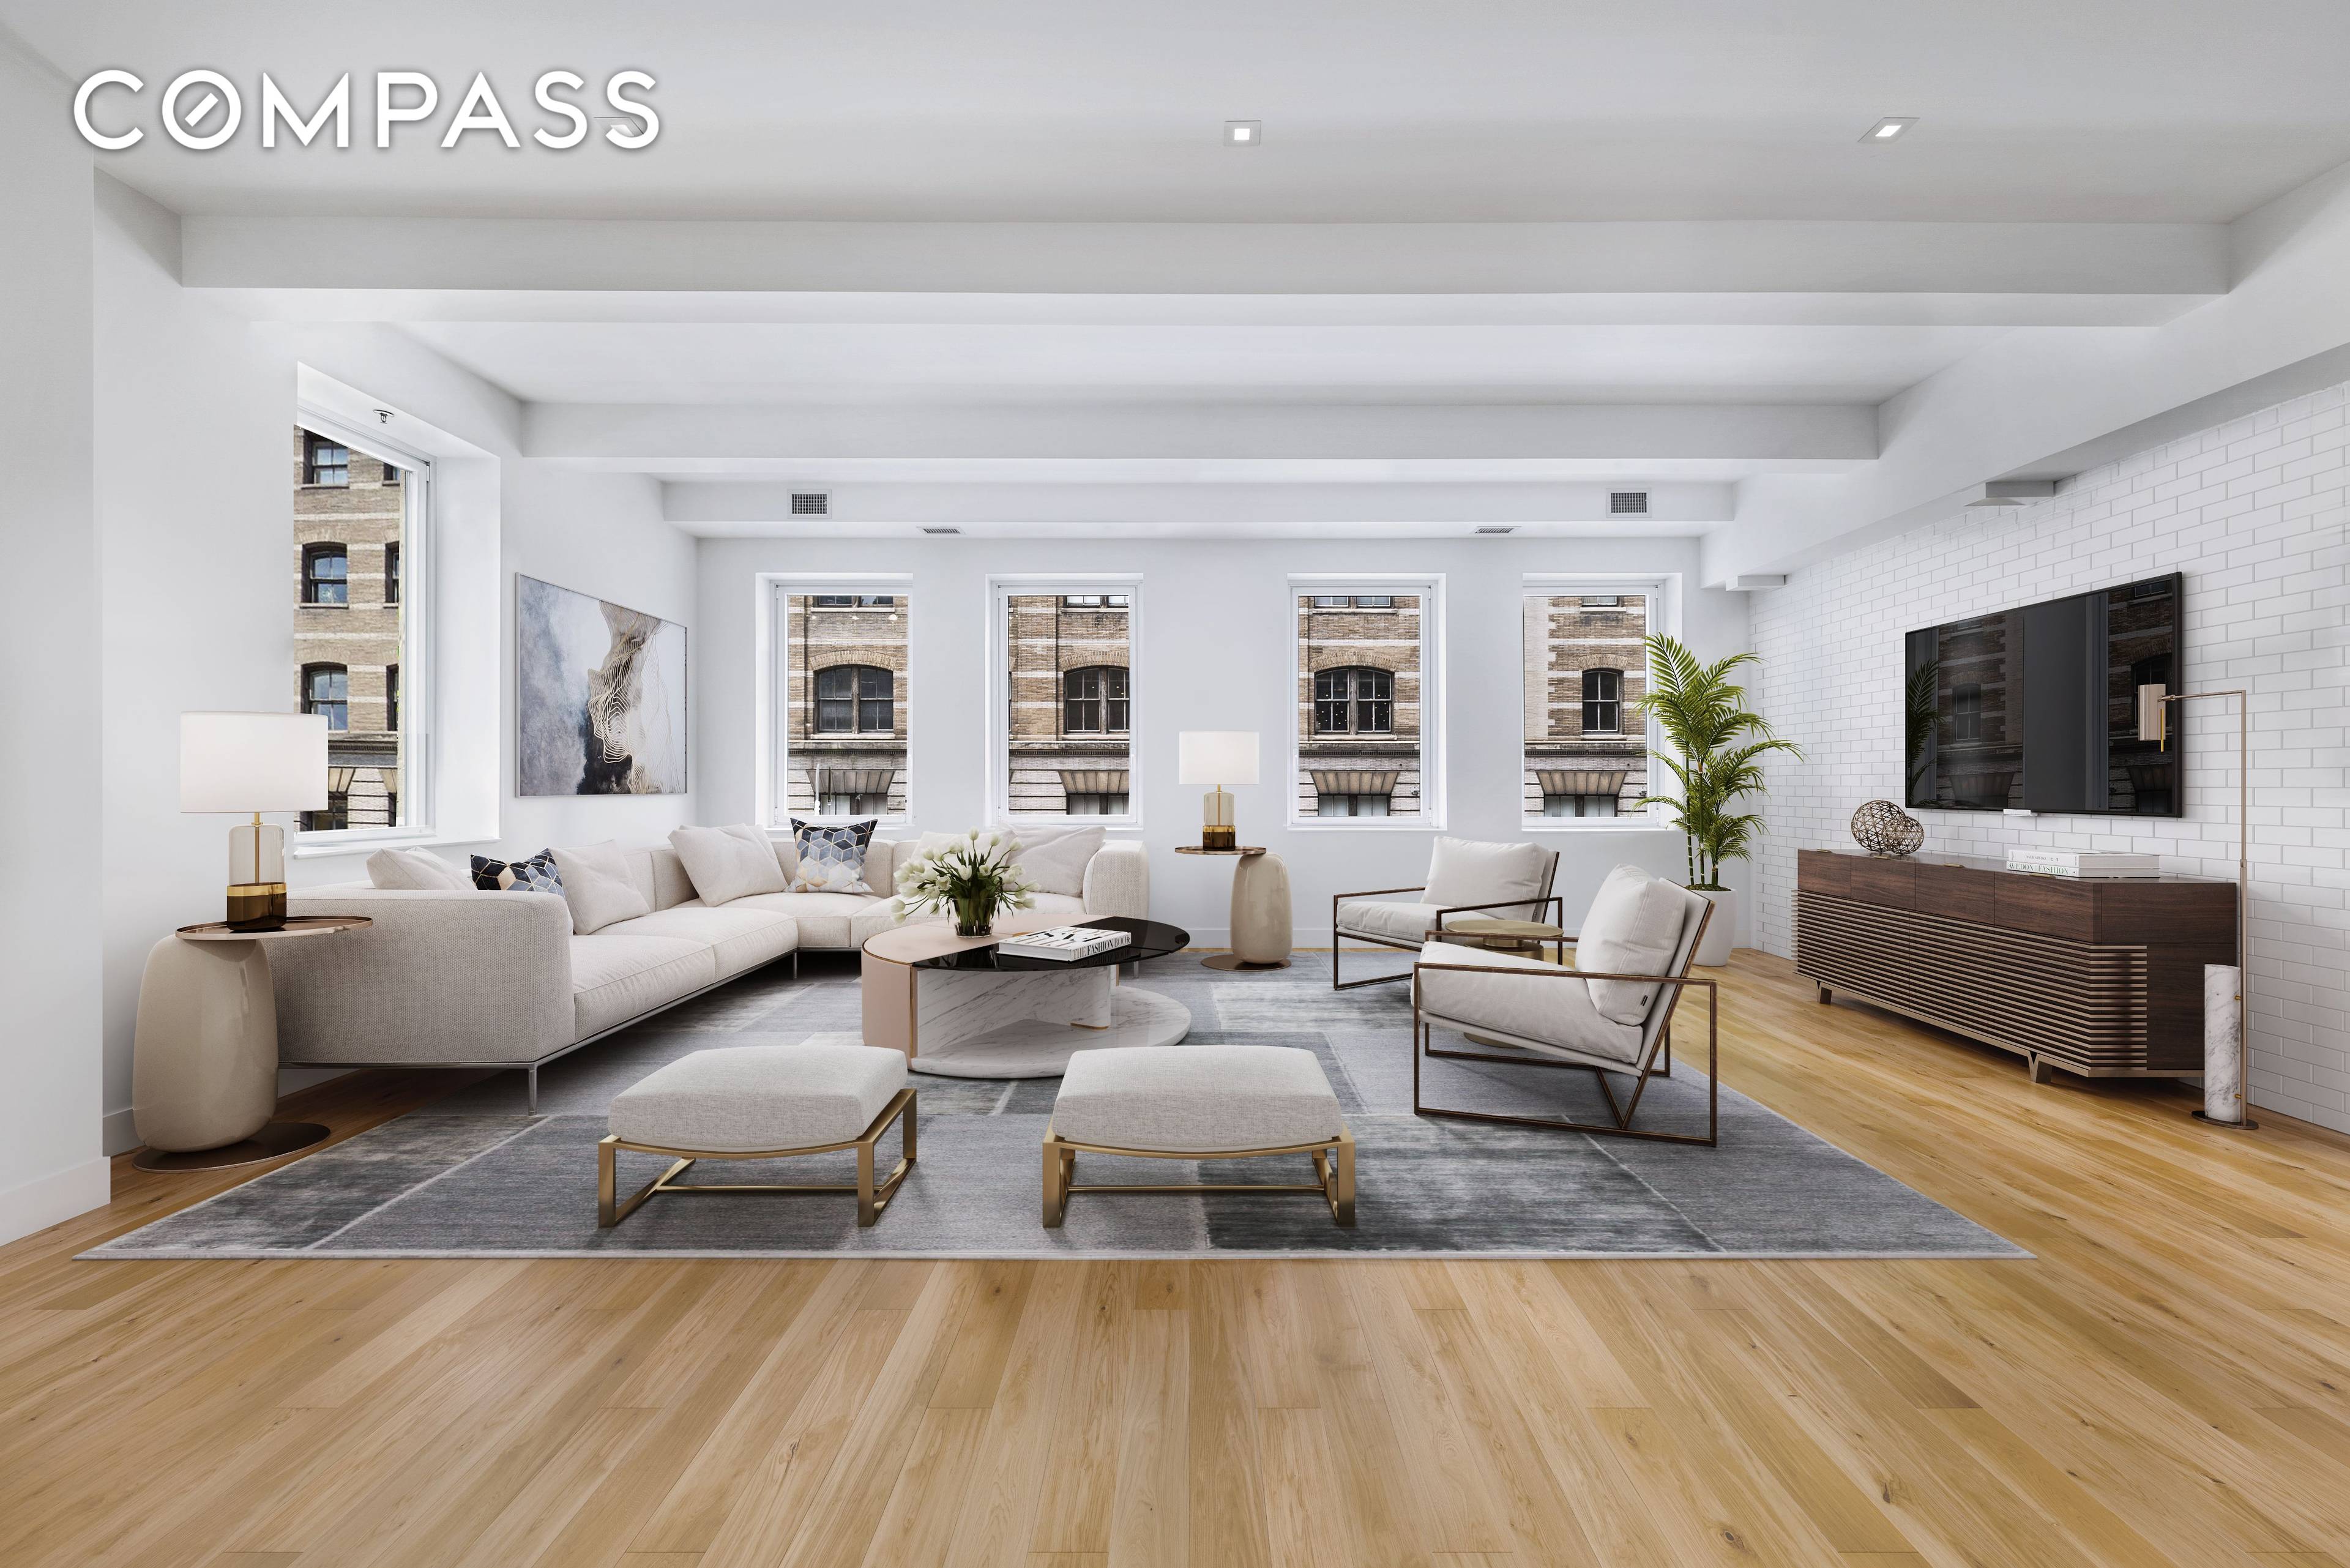 This absolutely massive 3, 670 sqft 4 bedroom sits in the heart of vibrant Hudson Square, steps from Soho, West Village and TriBeCa.